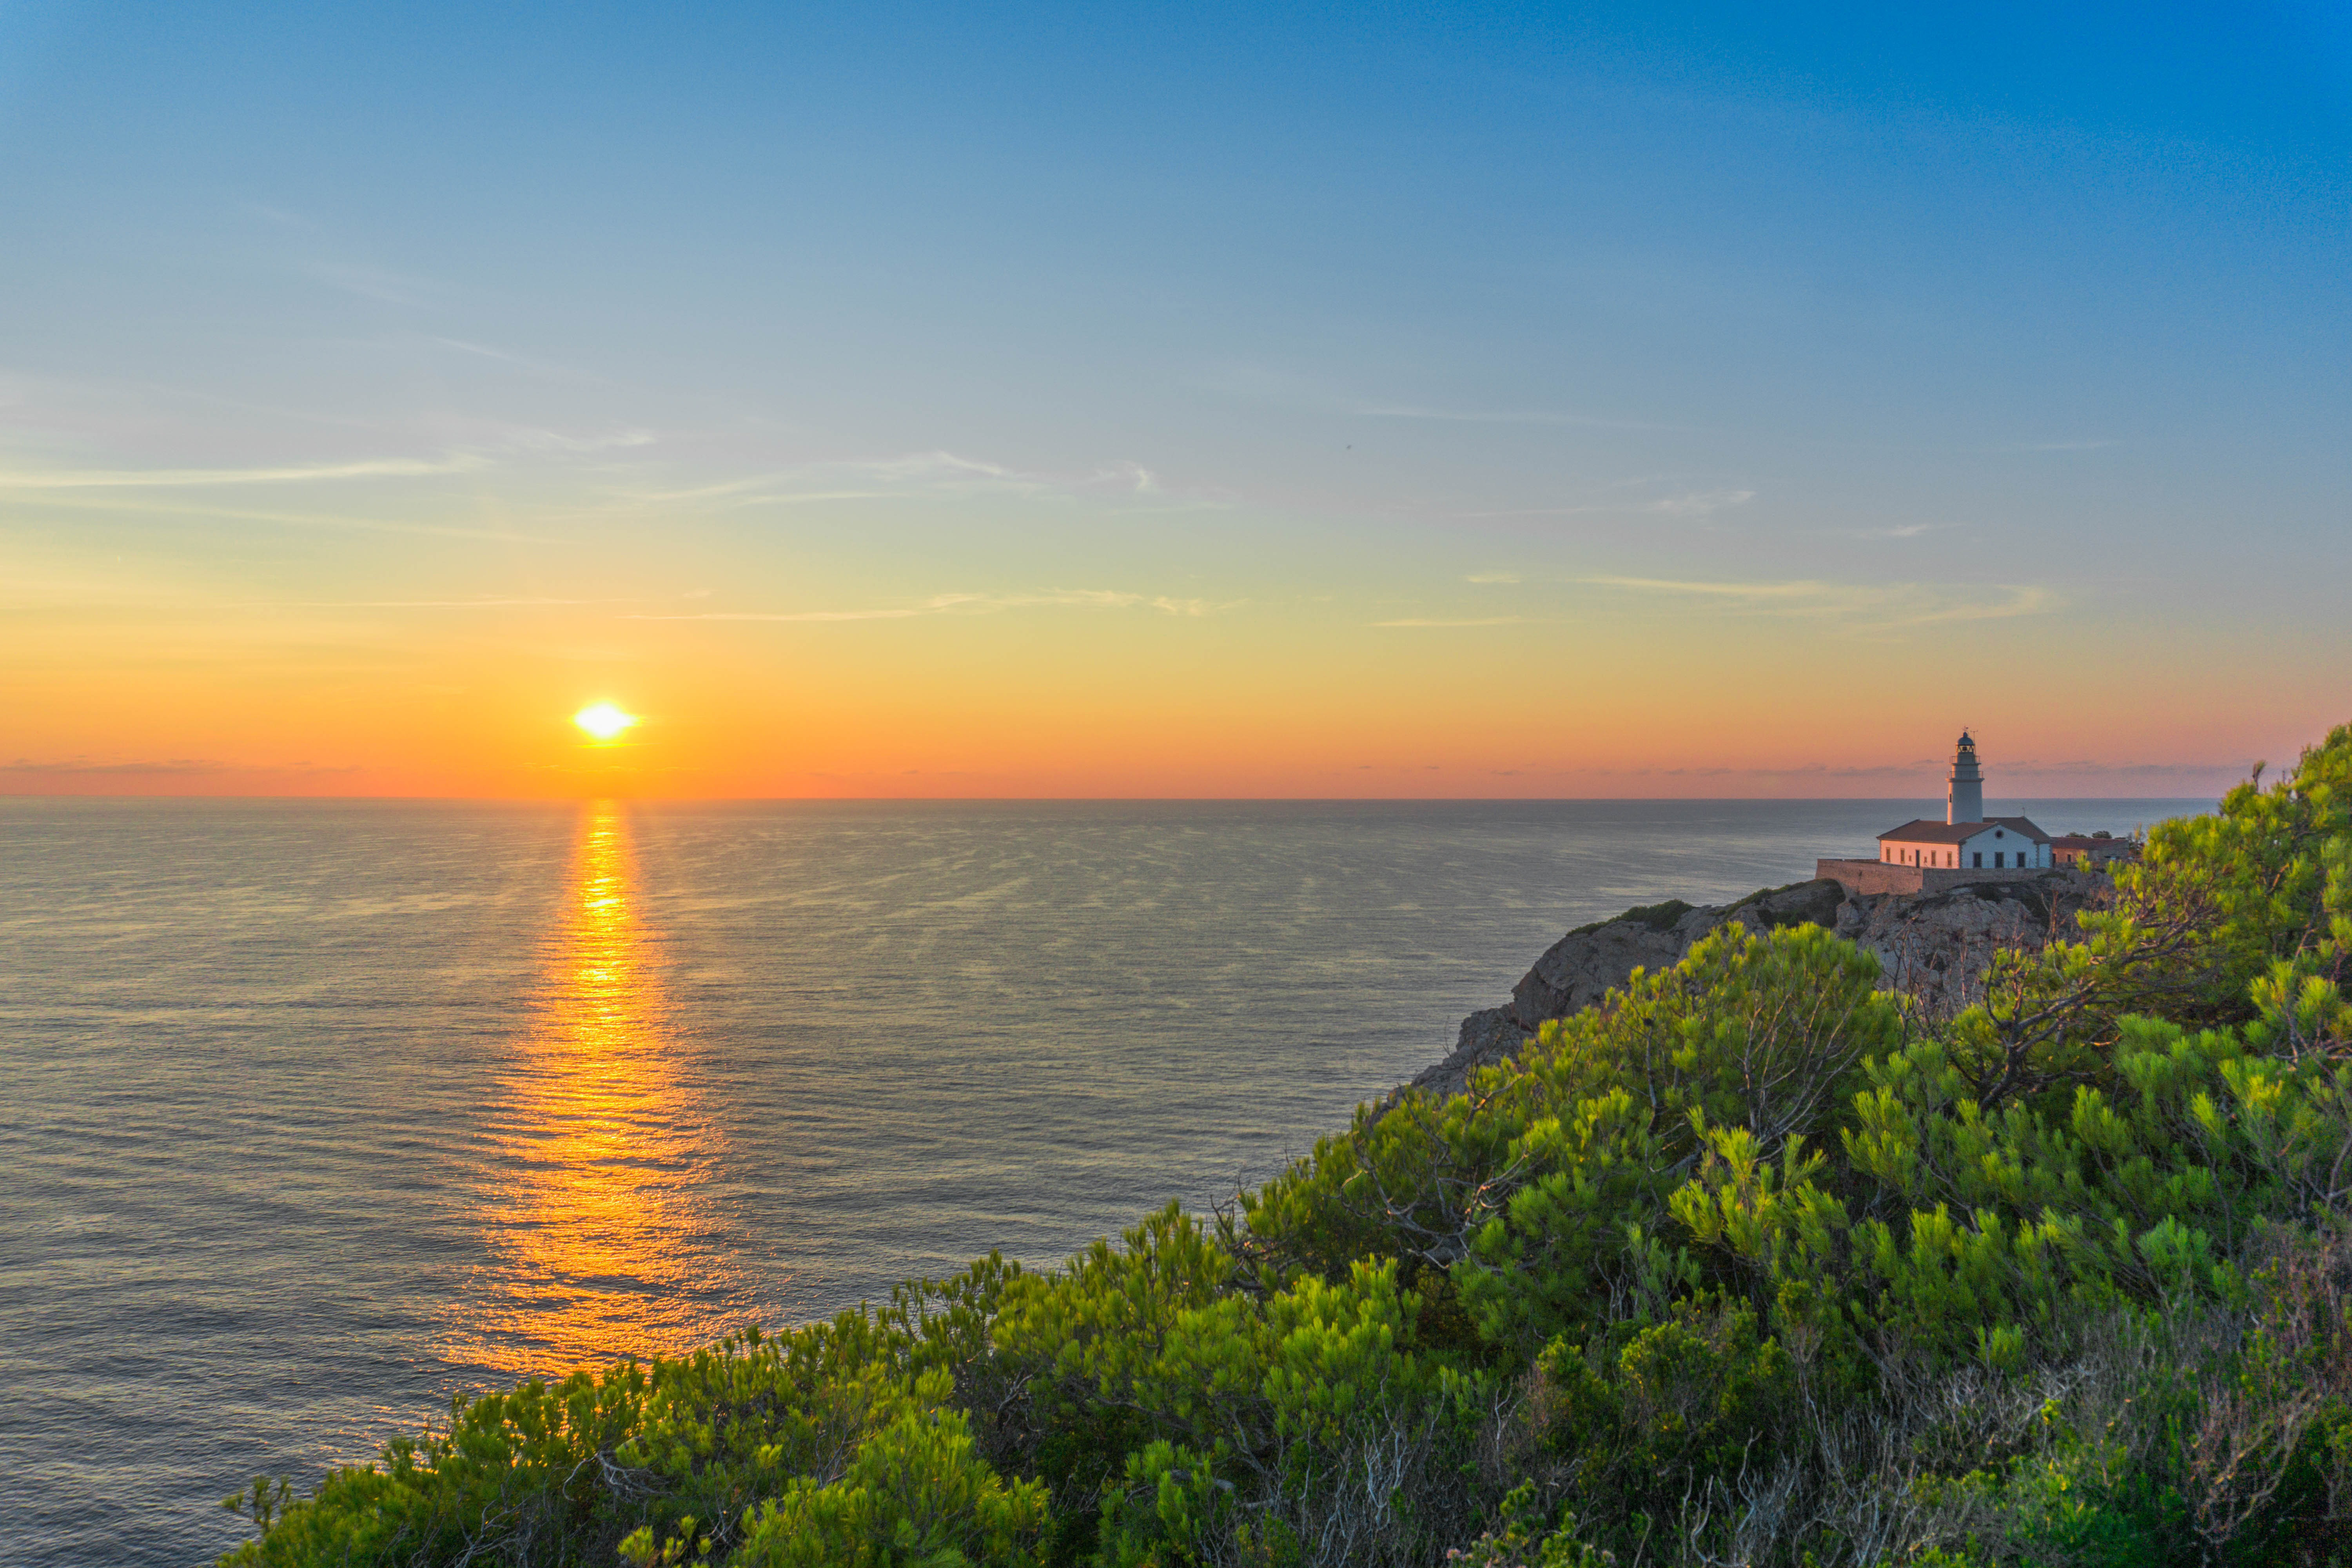 Sunset landscapes in Mallorca, Spain image - Free stock photo ...